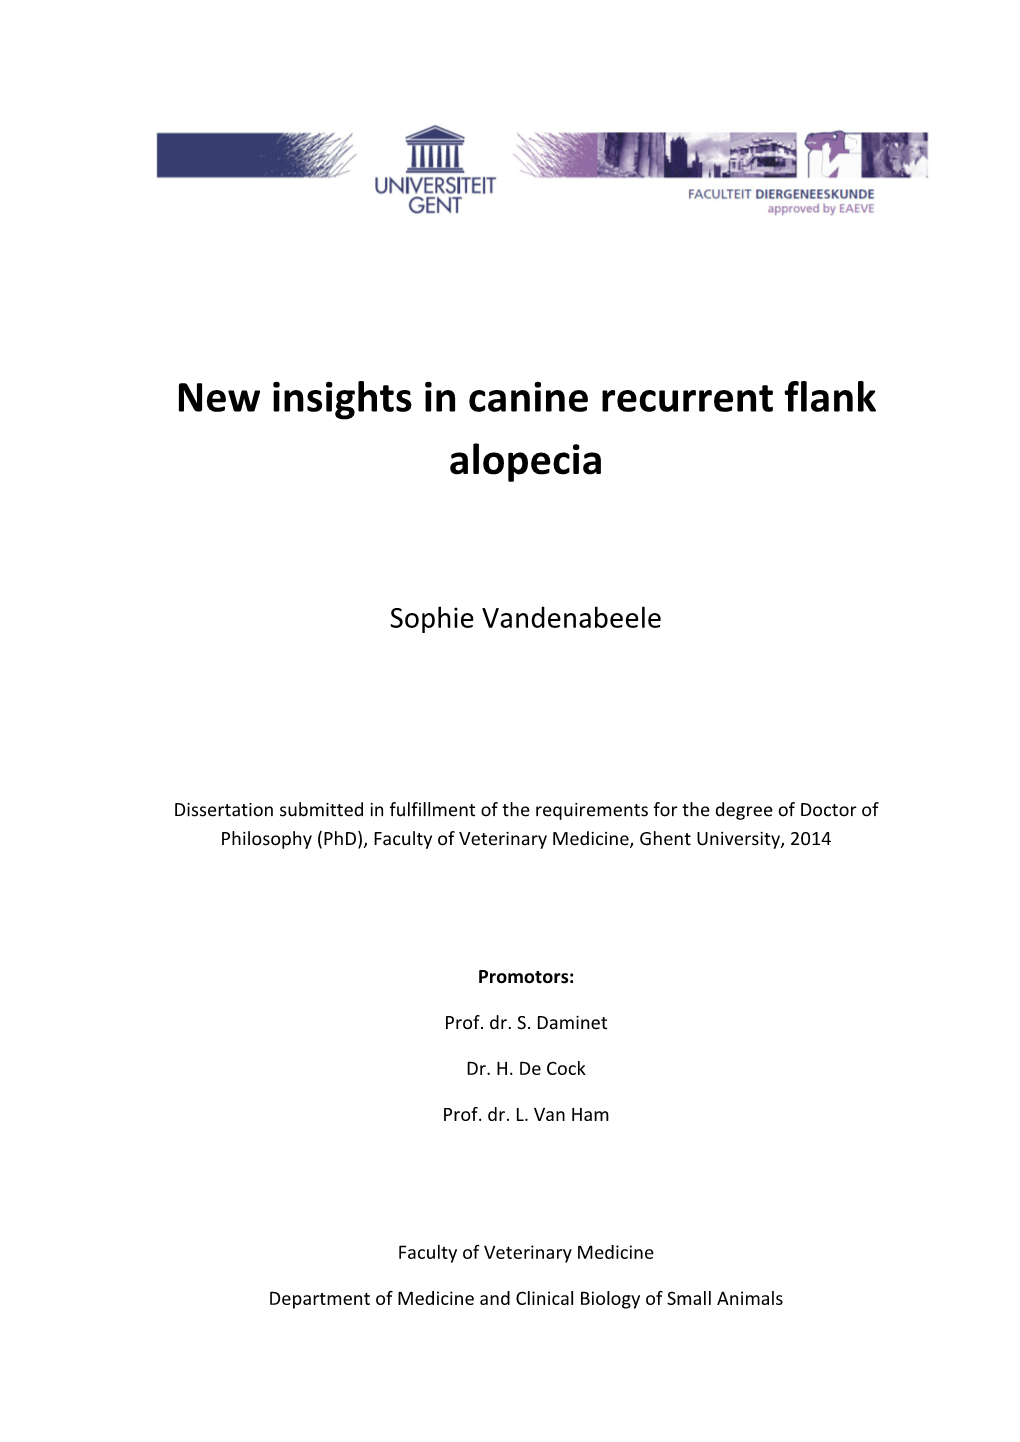 New Insights in Canine Recurrent Flank Alopecia